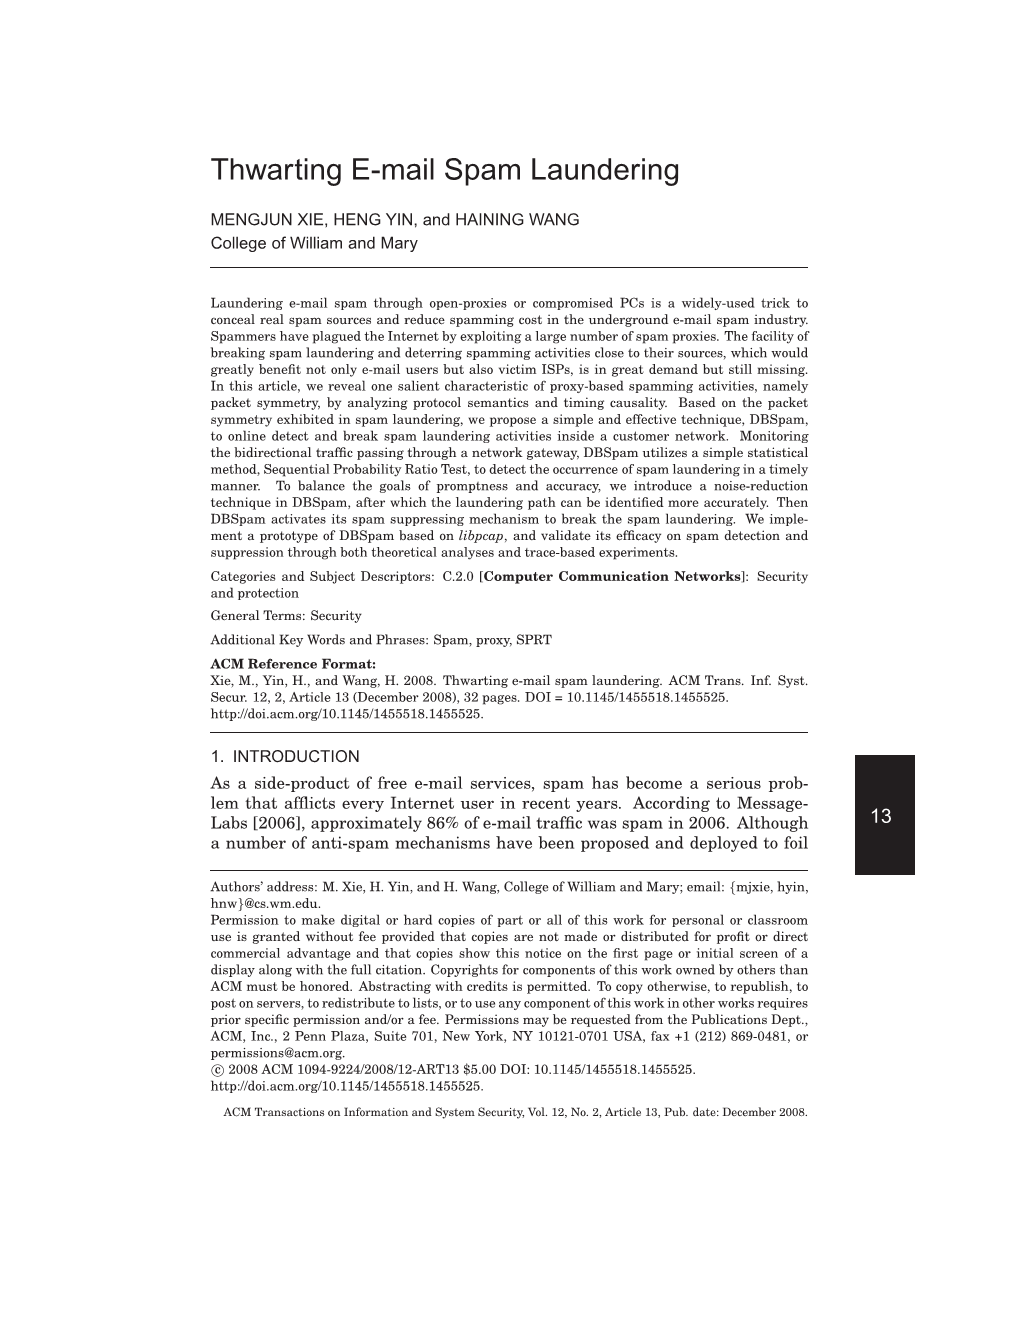 Thwarting Email Spam Laundering